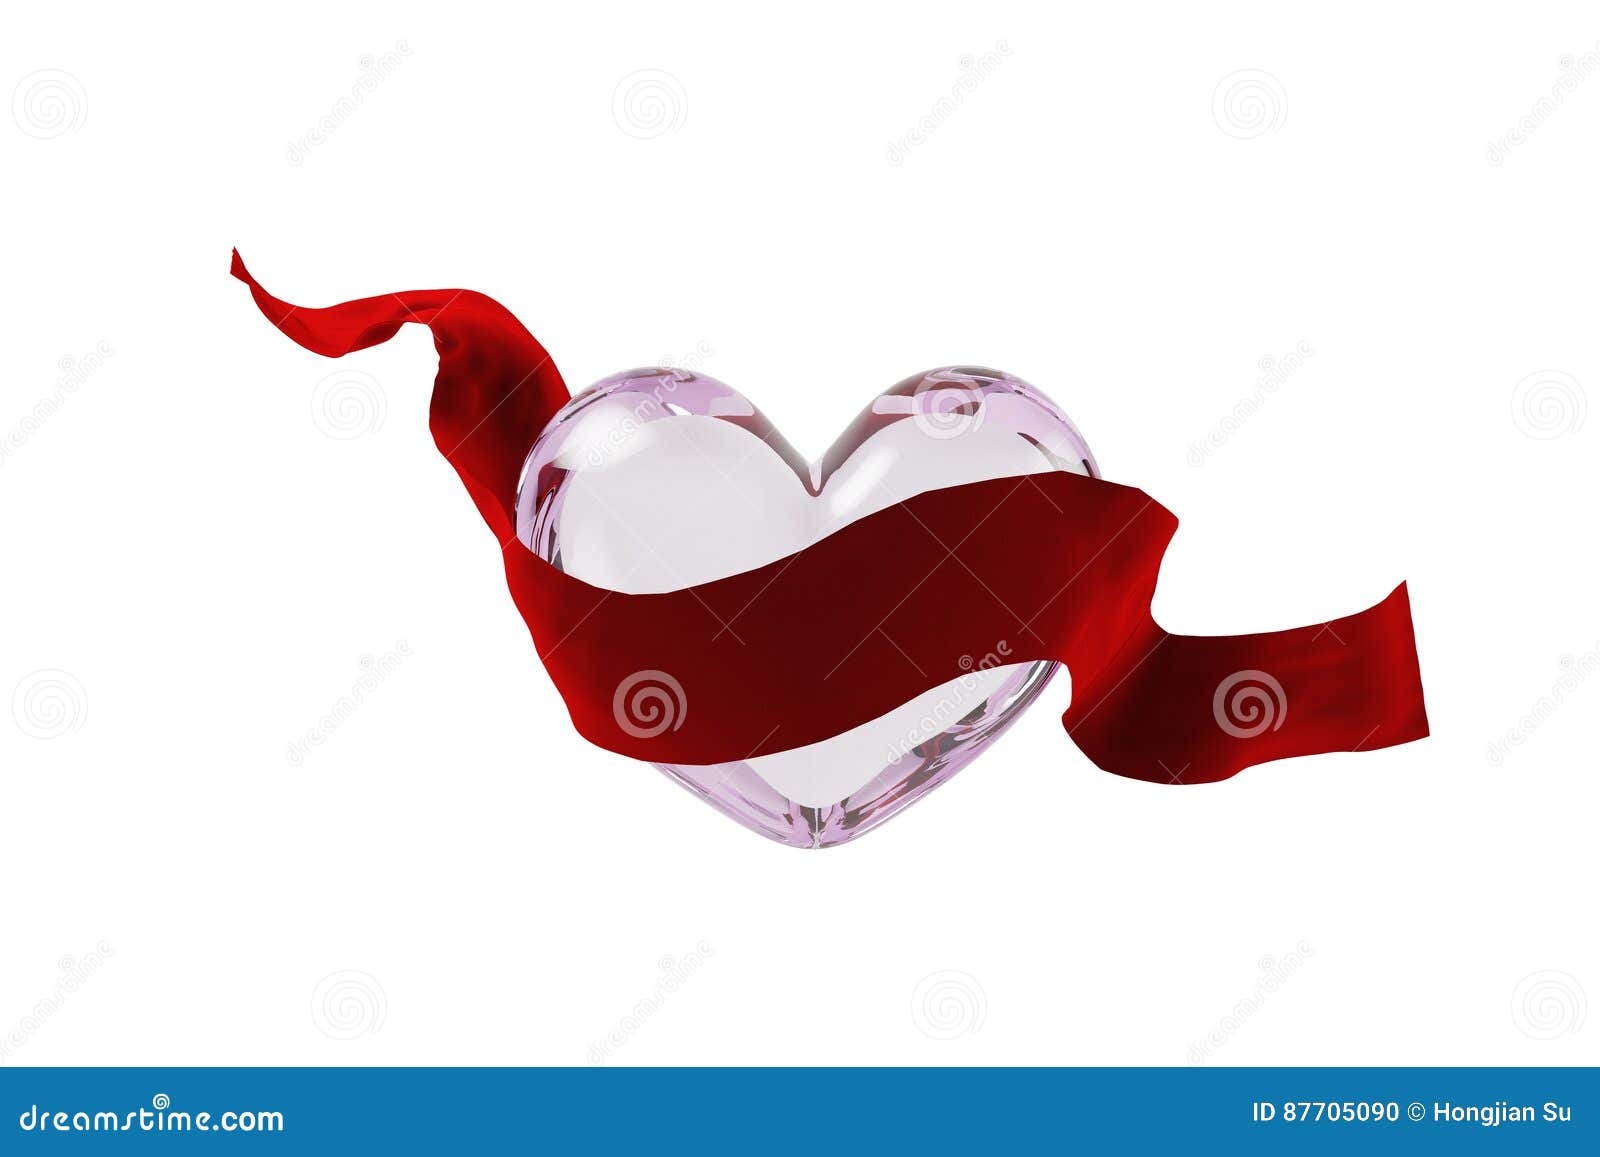 Ribbon and heart-shaped glass. A ribbon flying over a heart-shaped glass